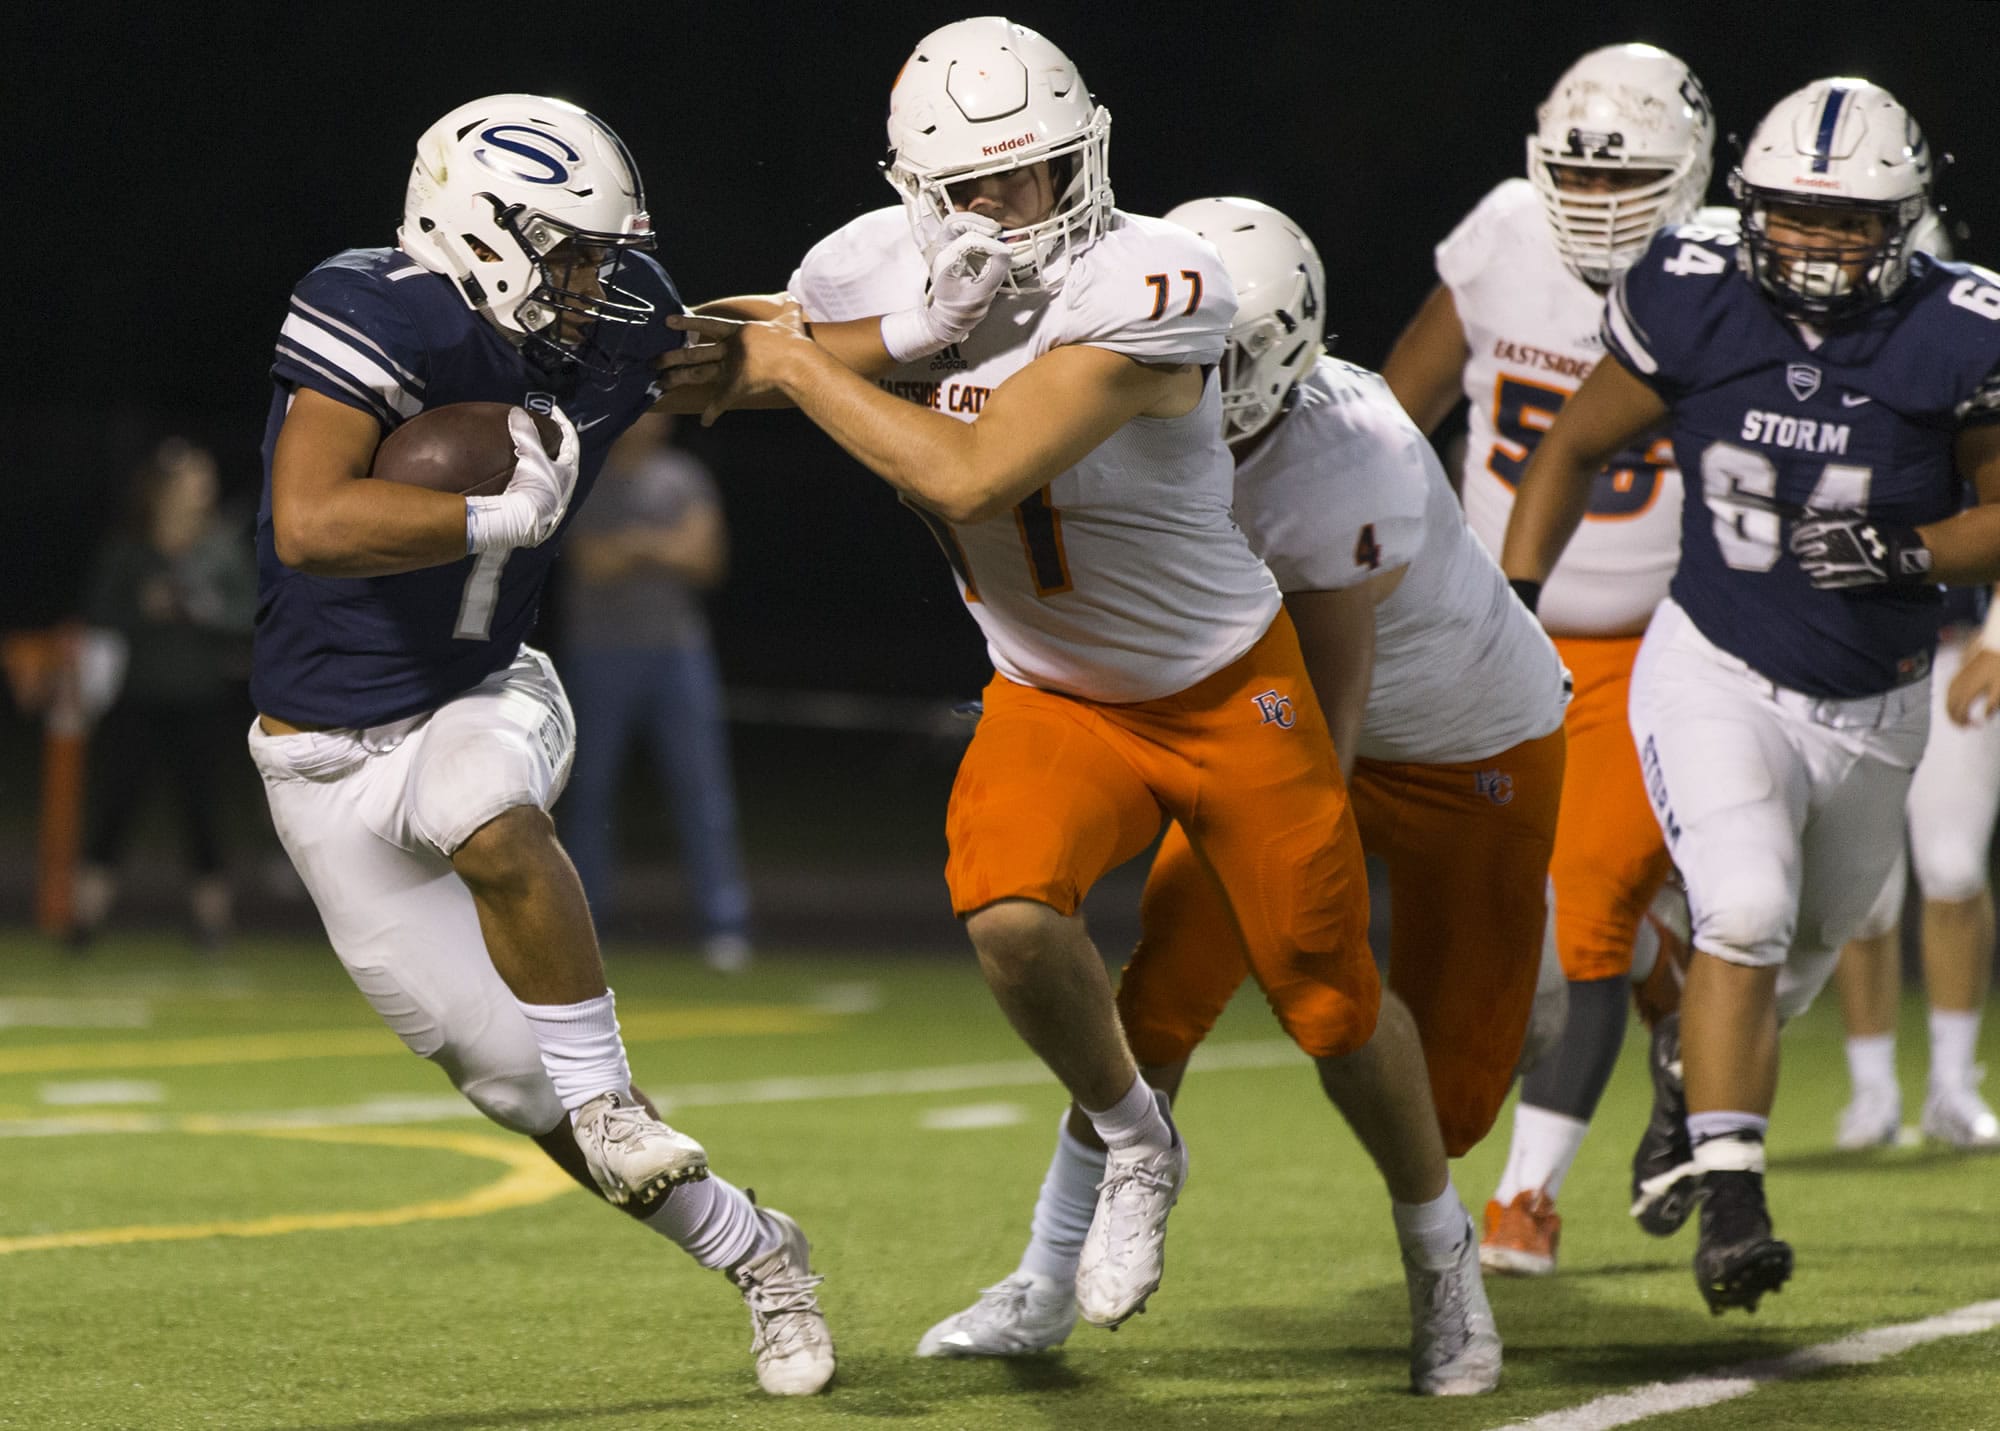 Storm Angelo Sarchi (1) fends off Crusader Ryan Taylor (77) during the Friday night football ball game at Kiggins Bowl between Skyview High School and Eastside Catholic School on Sept. 8, 2017.